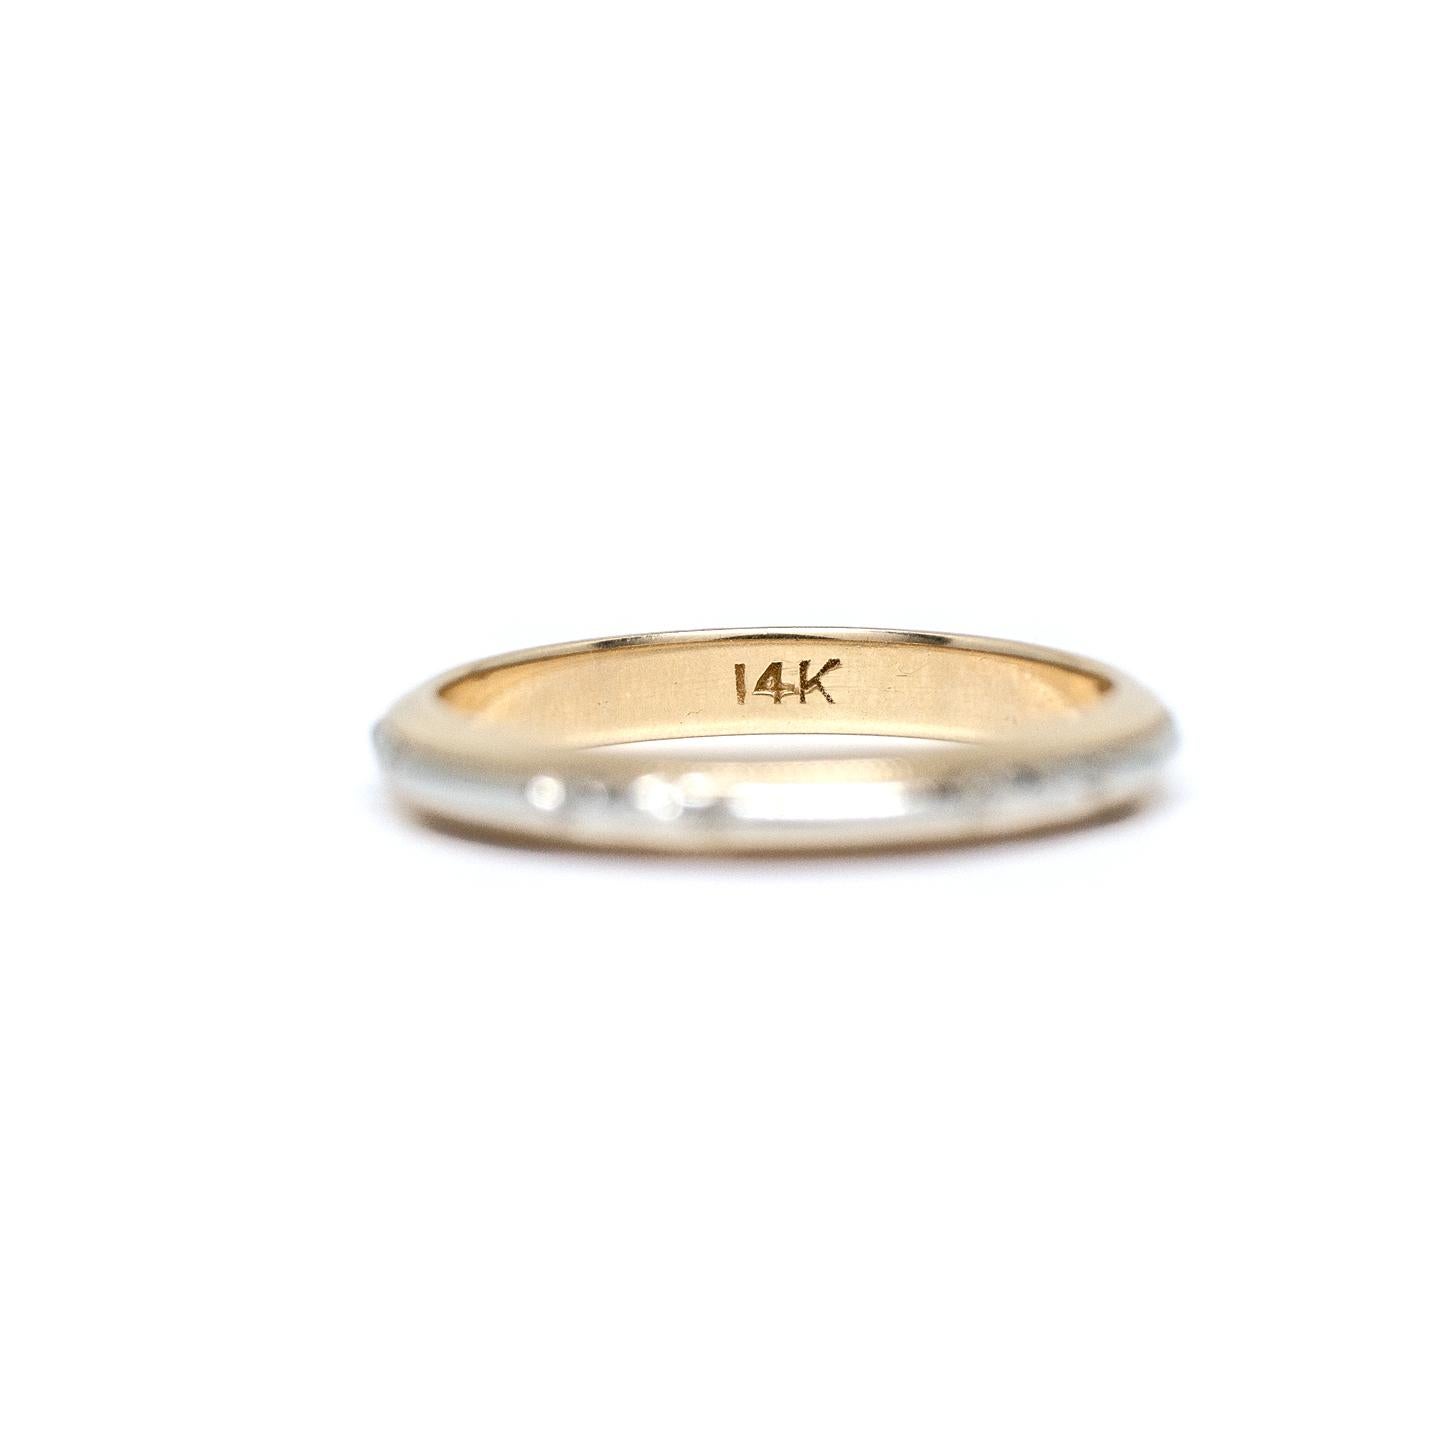 white and yellow gold wedding bands